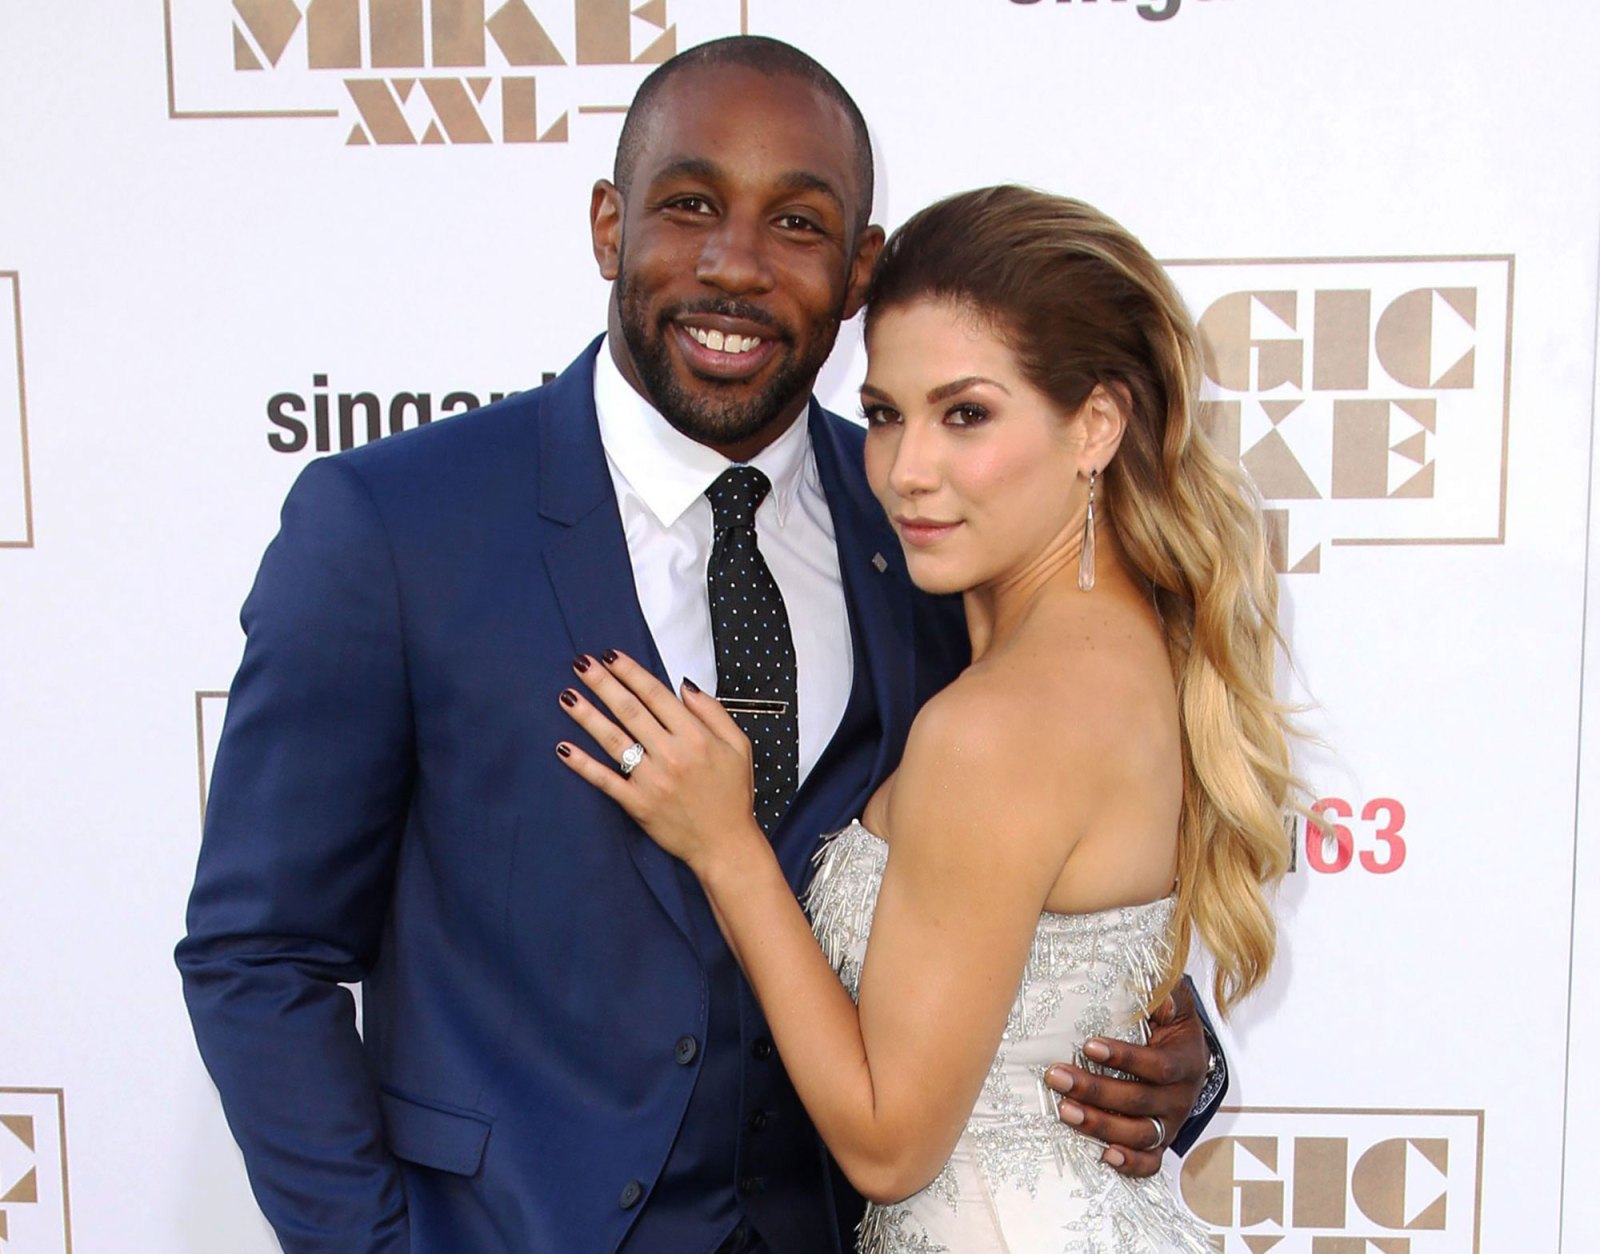 tephen 'tWitch' Boss and Wife Allison Holker's Relationship Timeline white dress